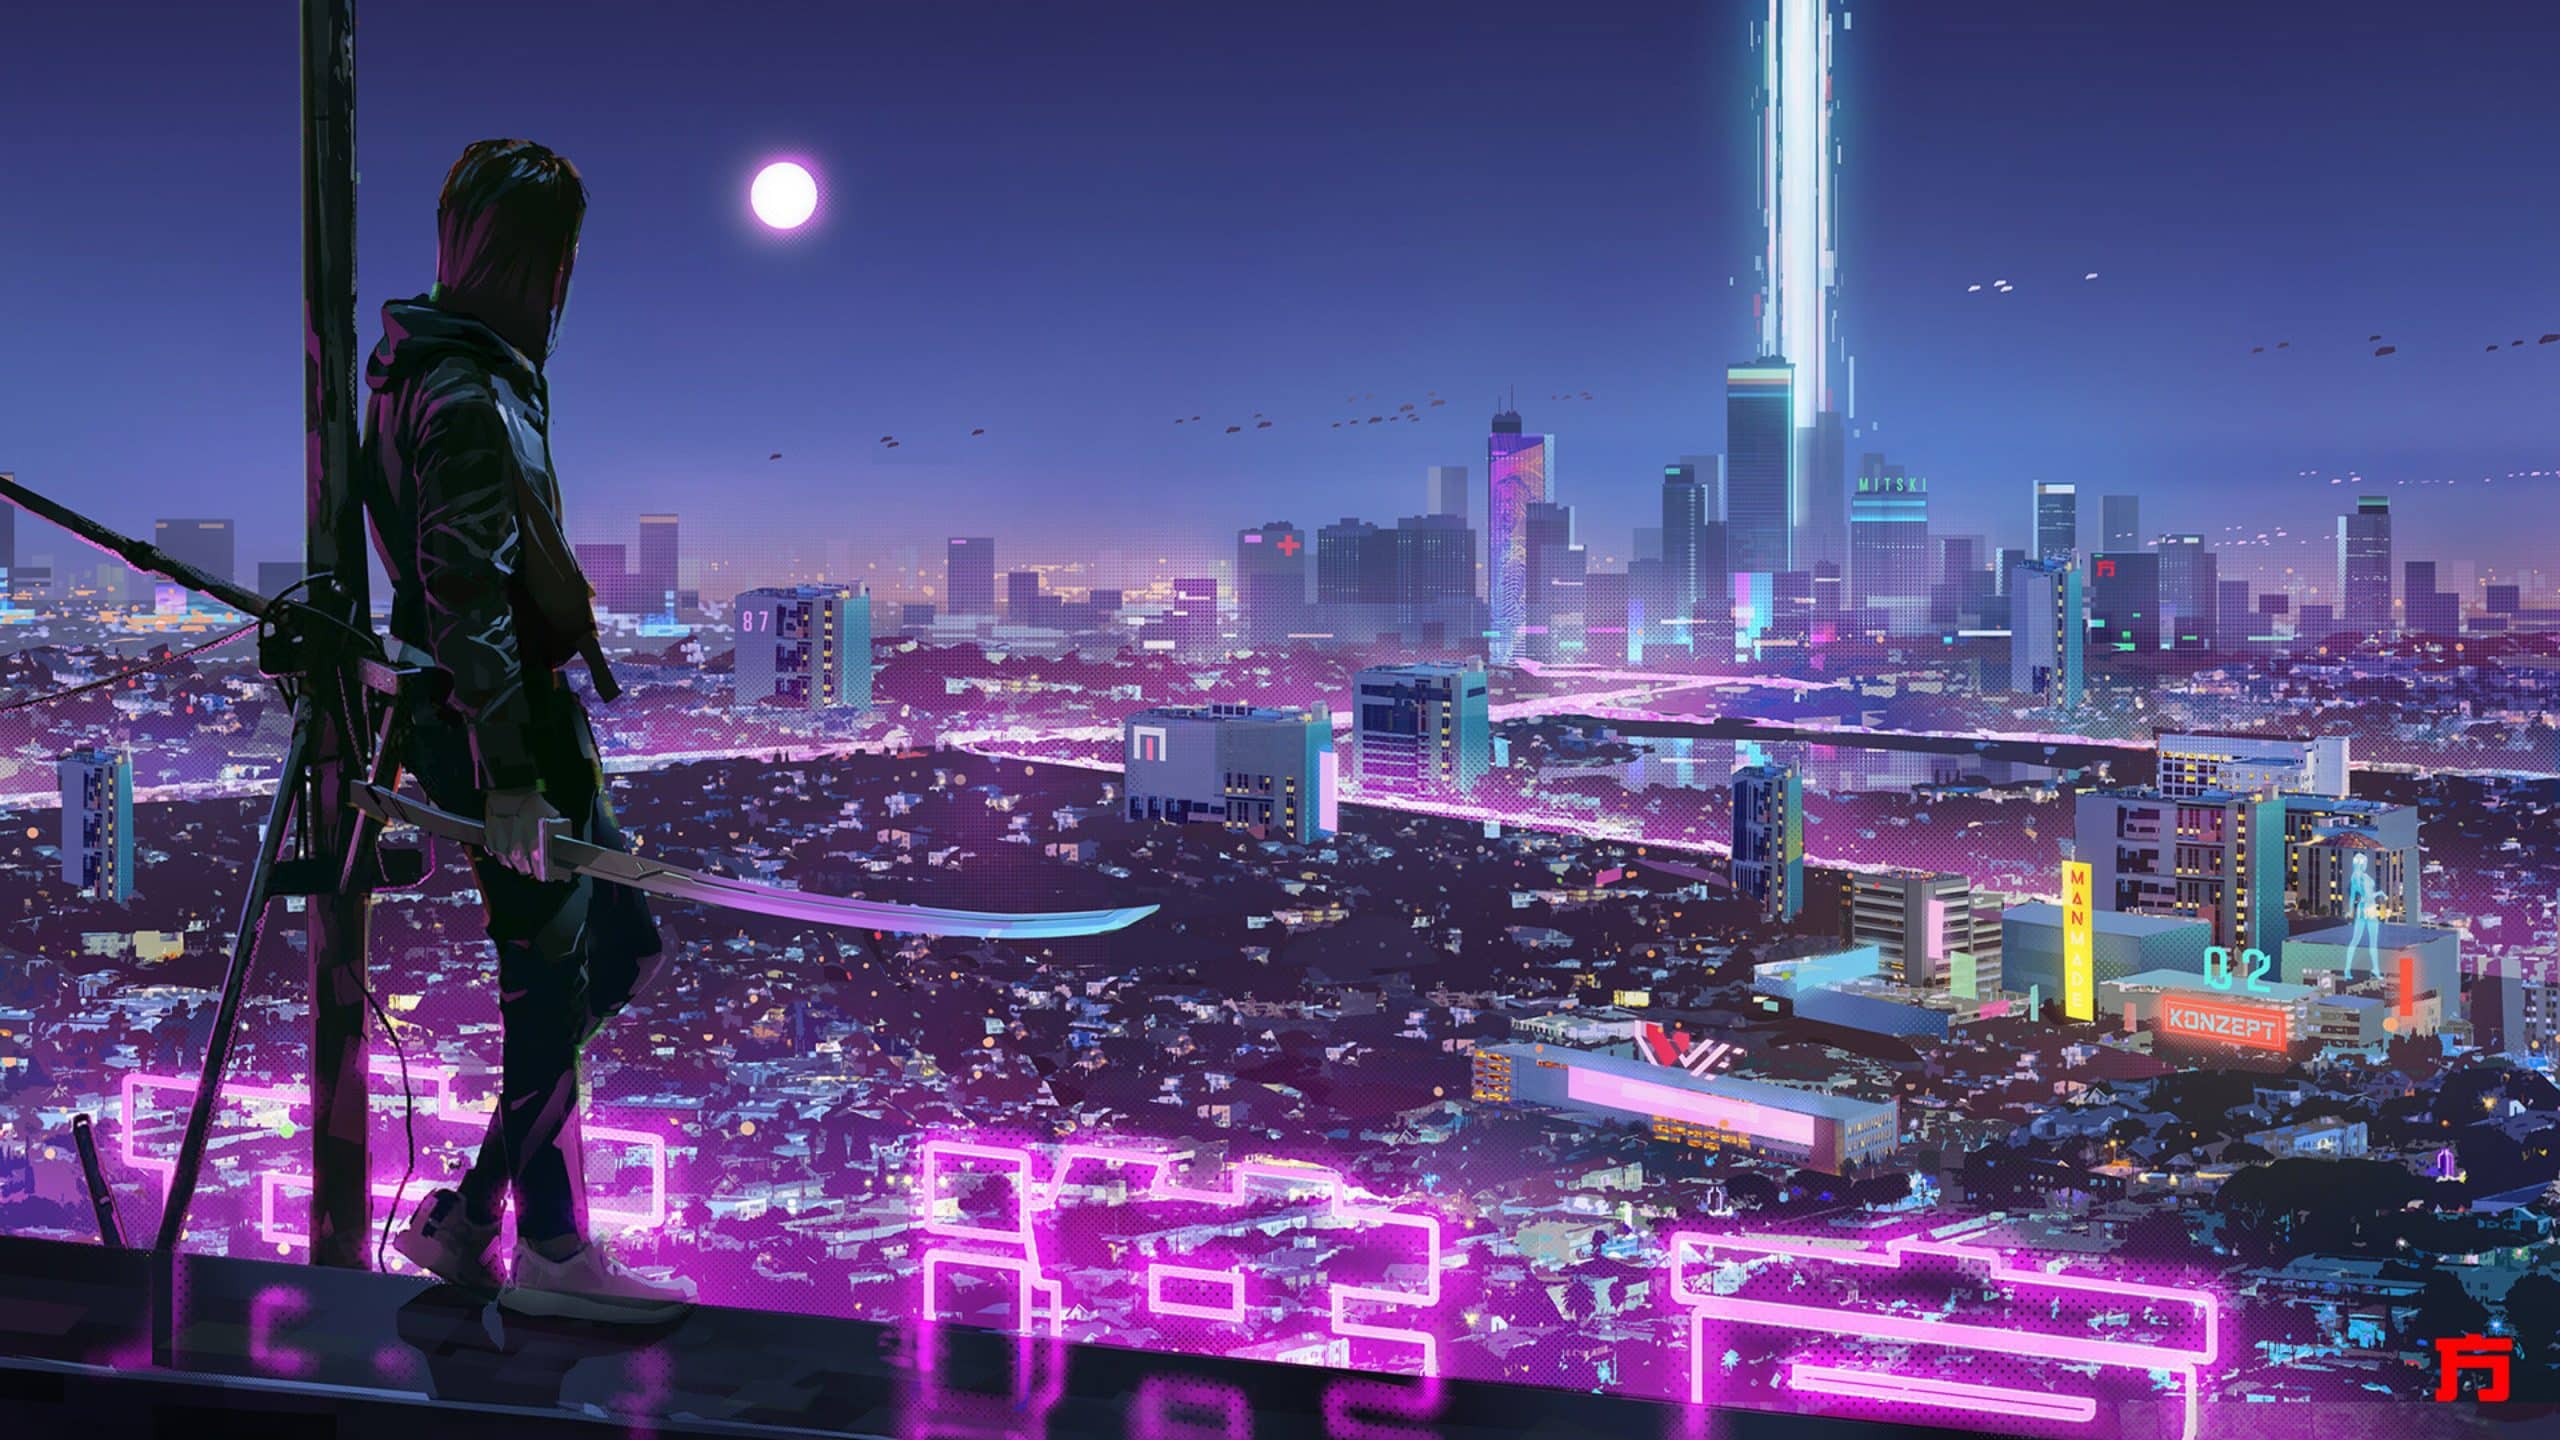 A person standing on top of the building - Cyberpunk, HD